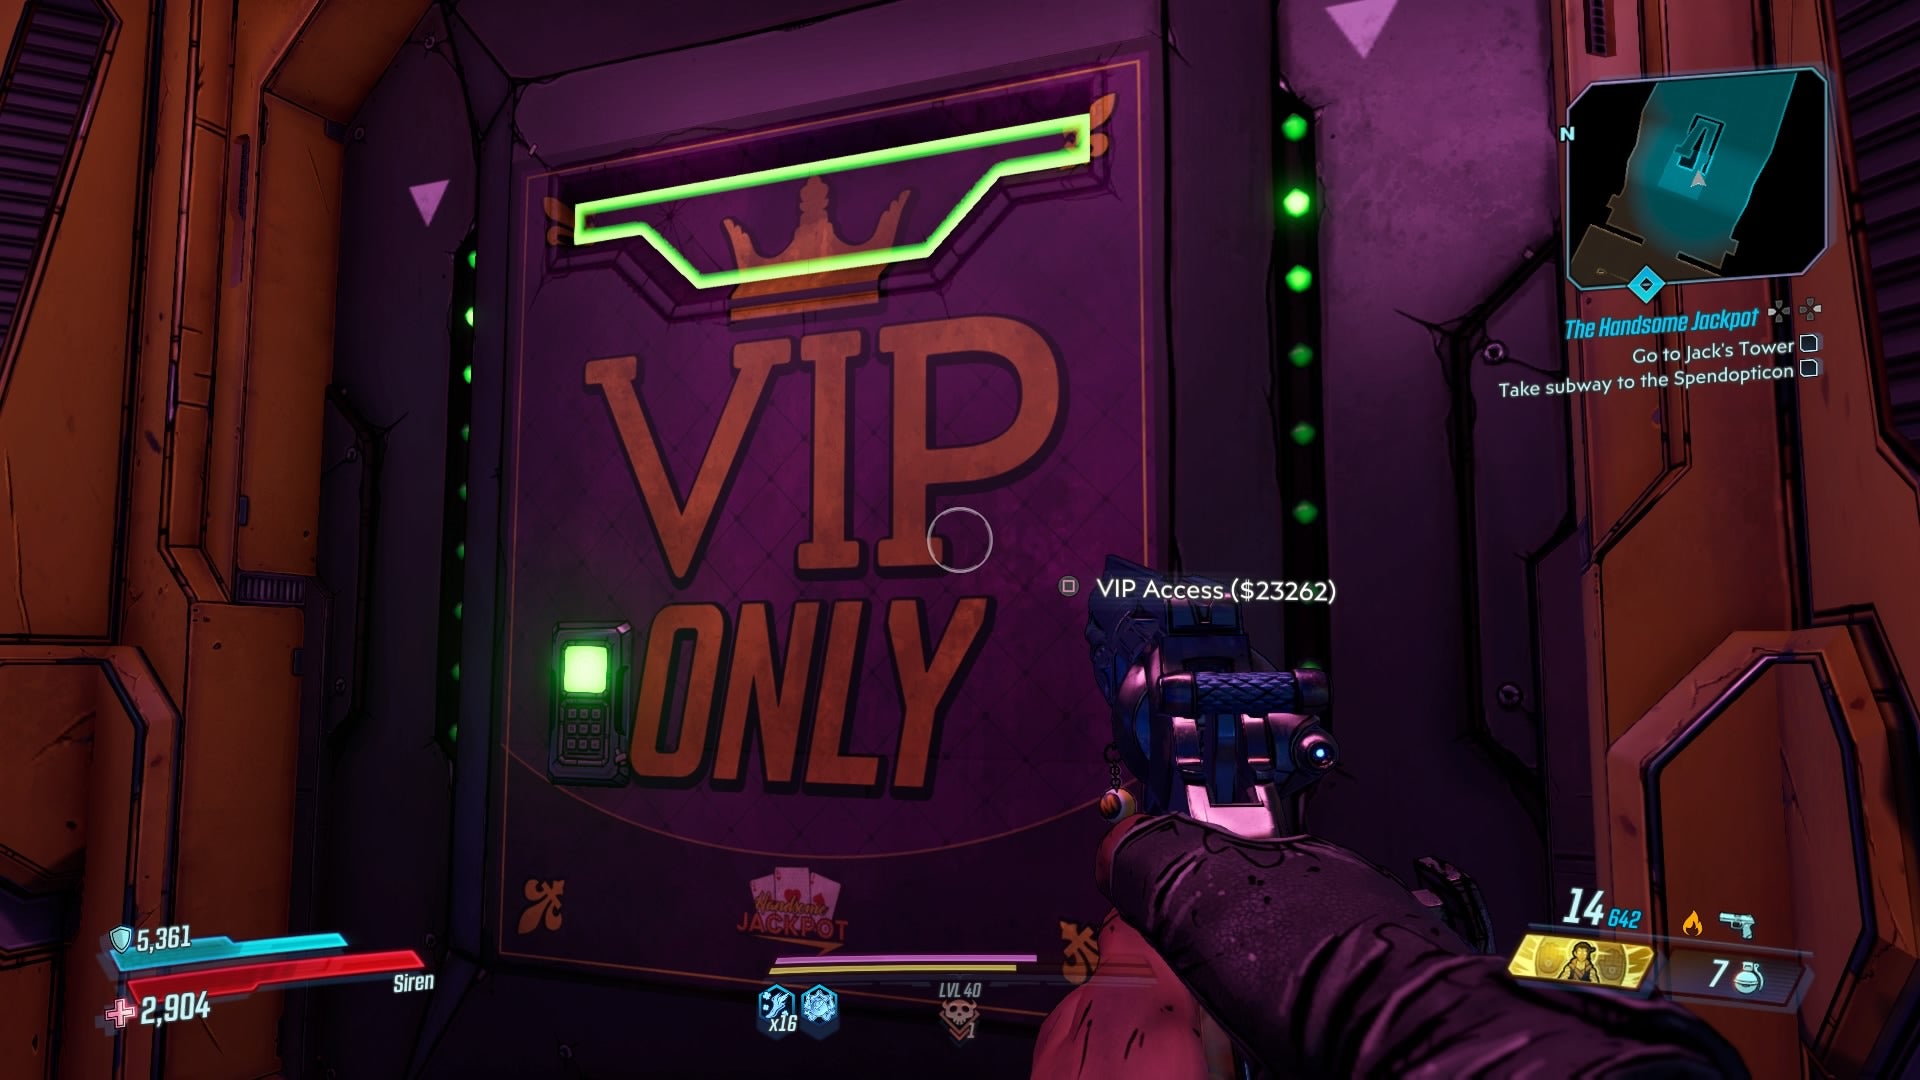 Image for Borderlands 3 Handsome Jackpot VIP Rooms - Are they worth it?